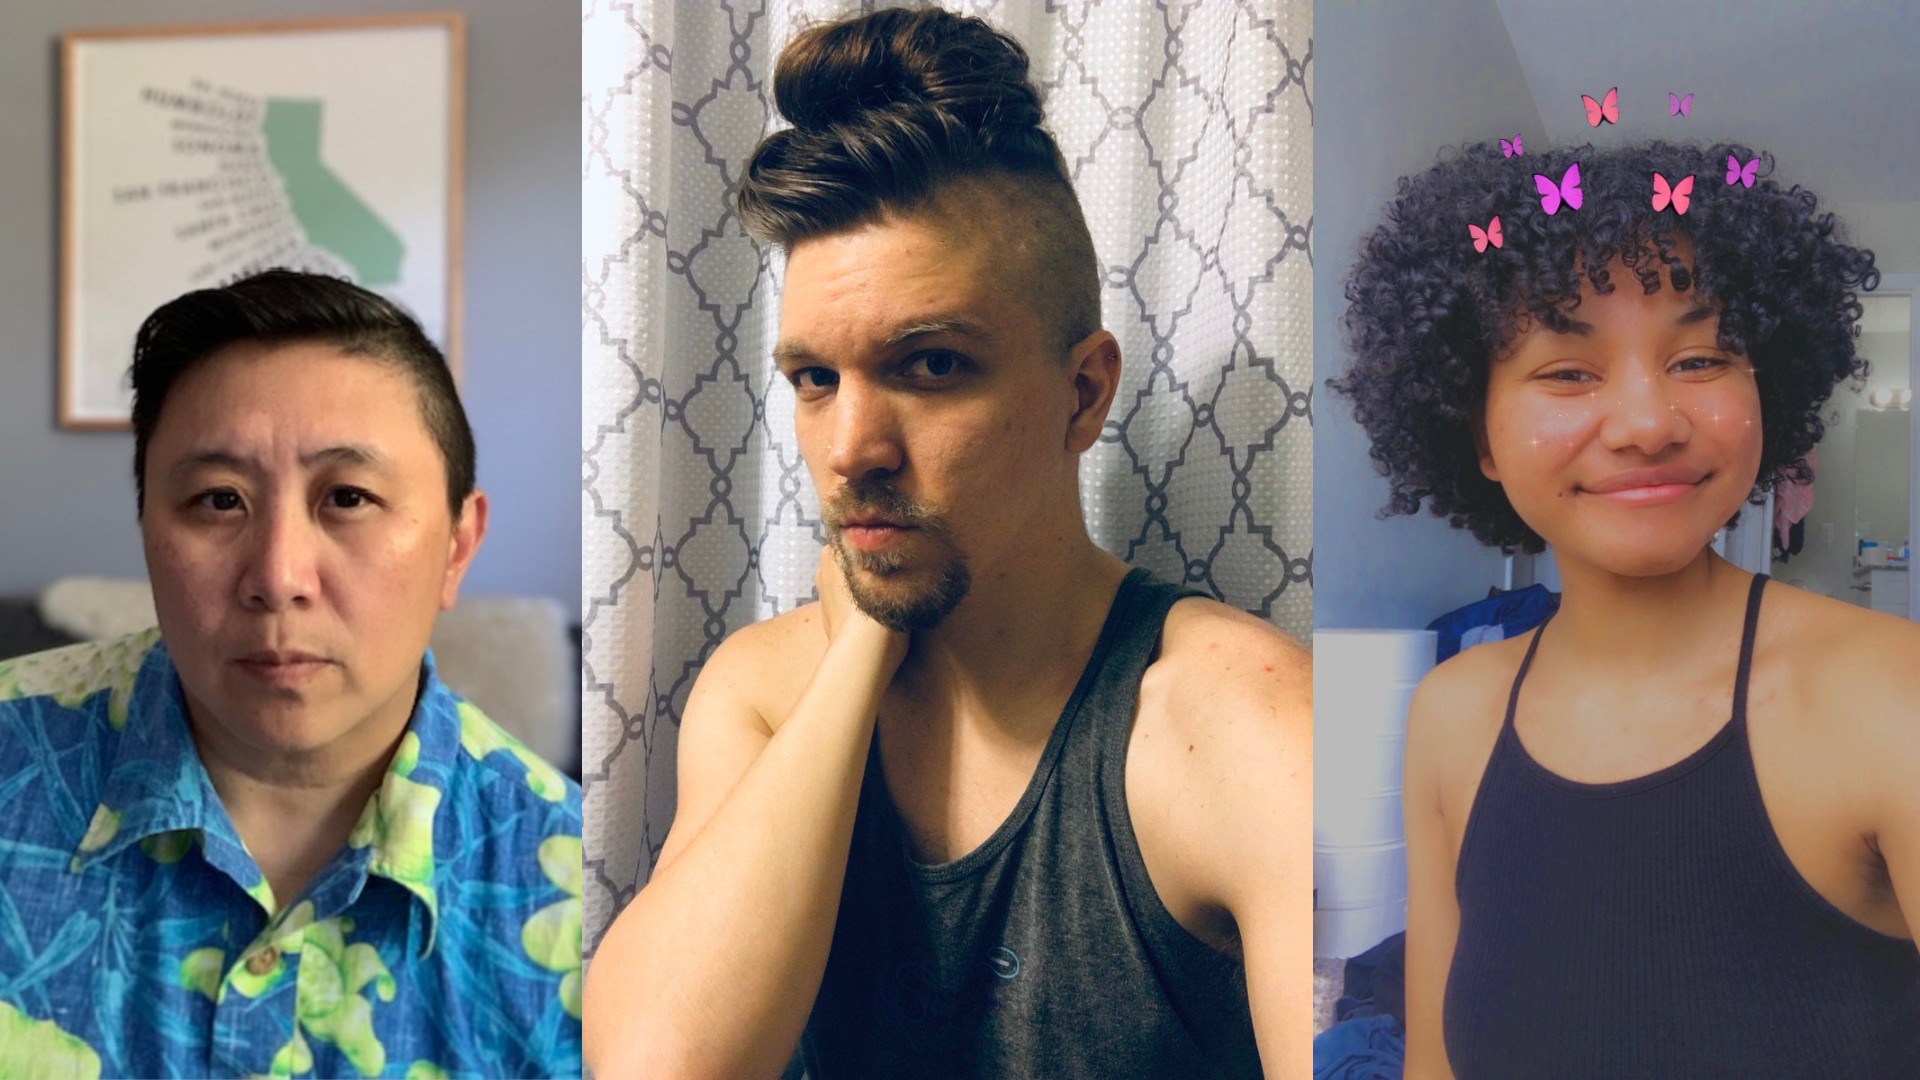 The Queer Haircuts Of Quarantine